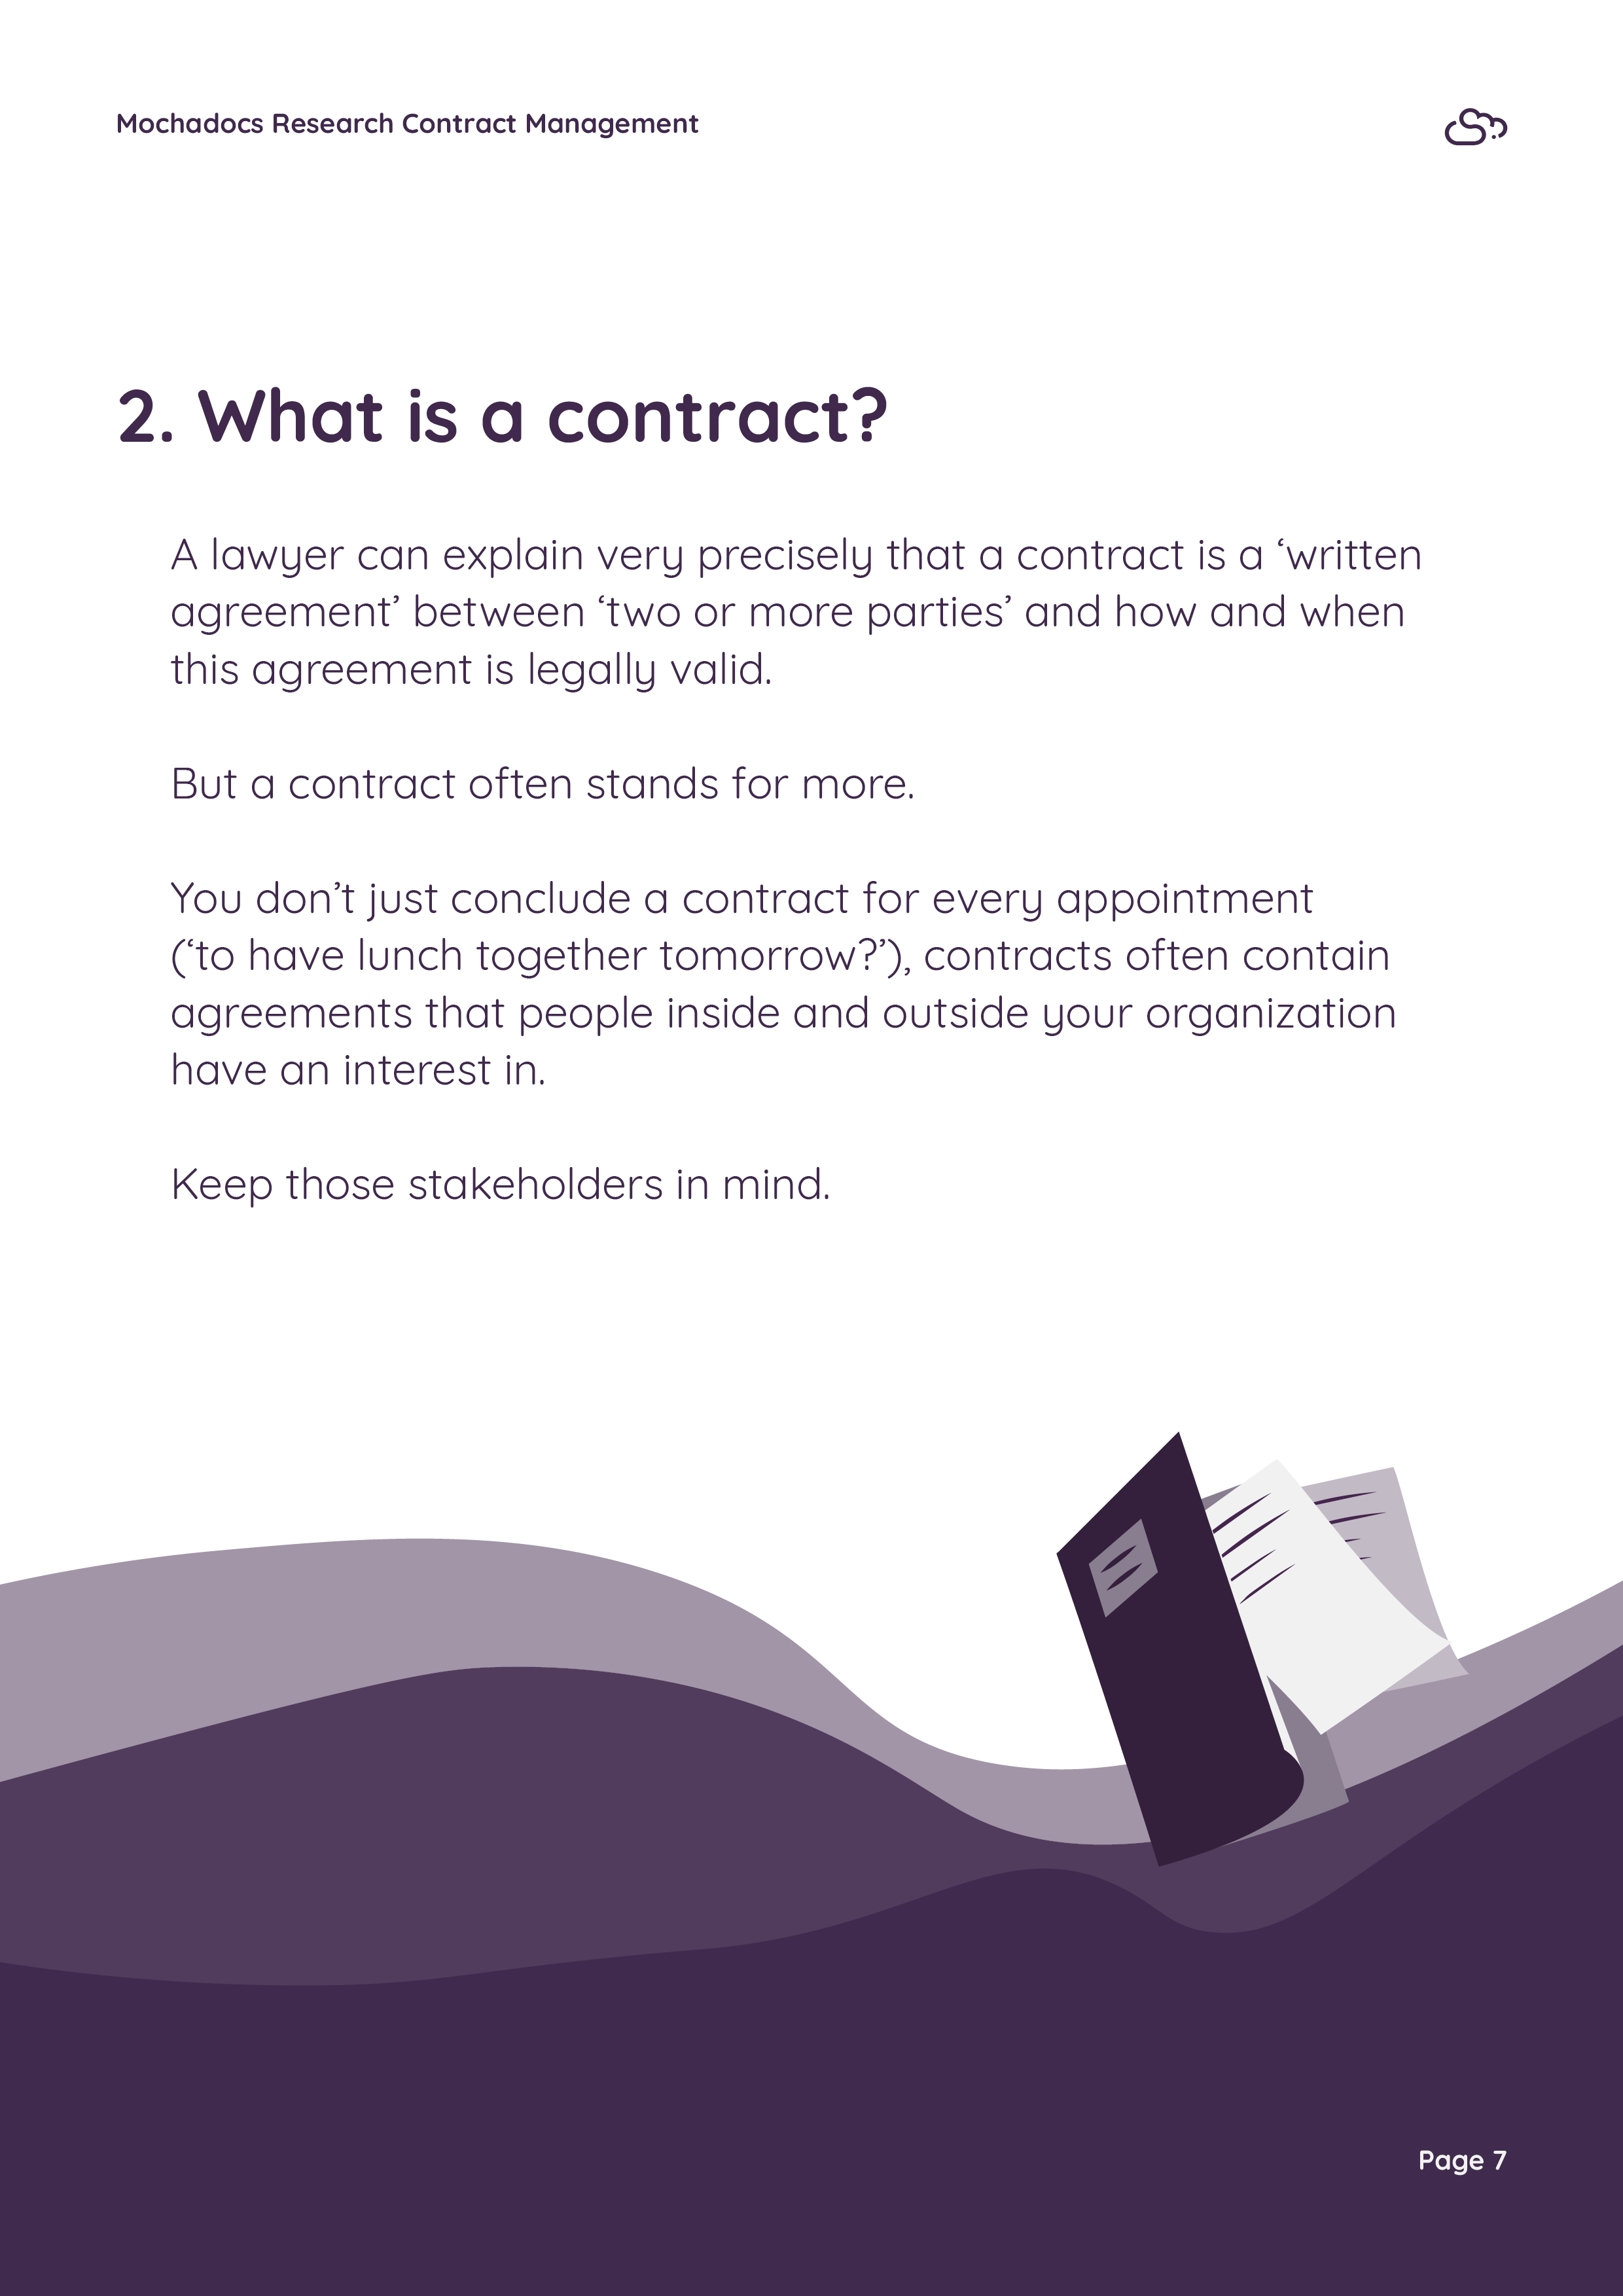 EN - What is a contract (managing)?7